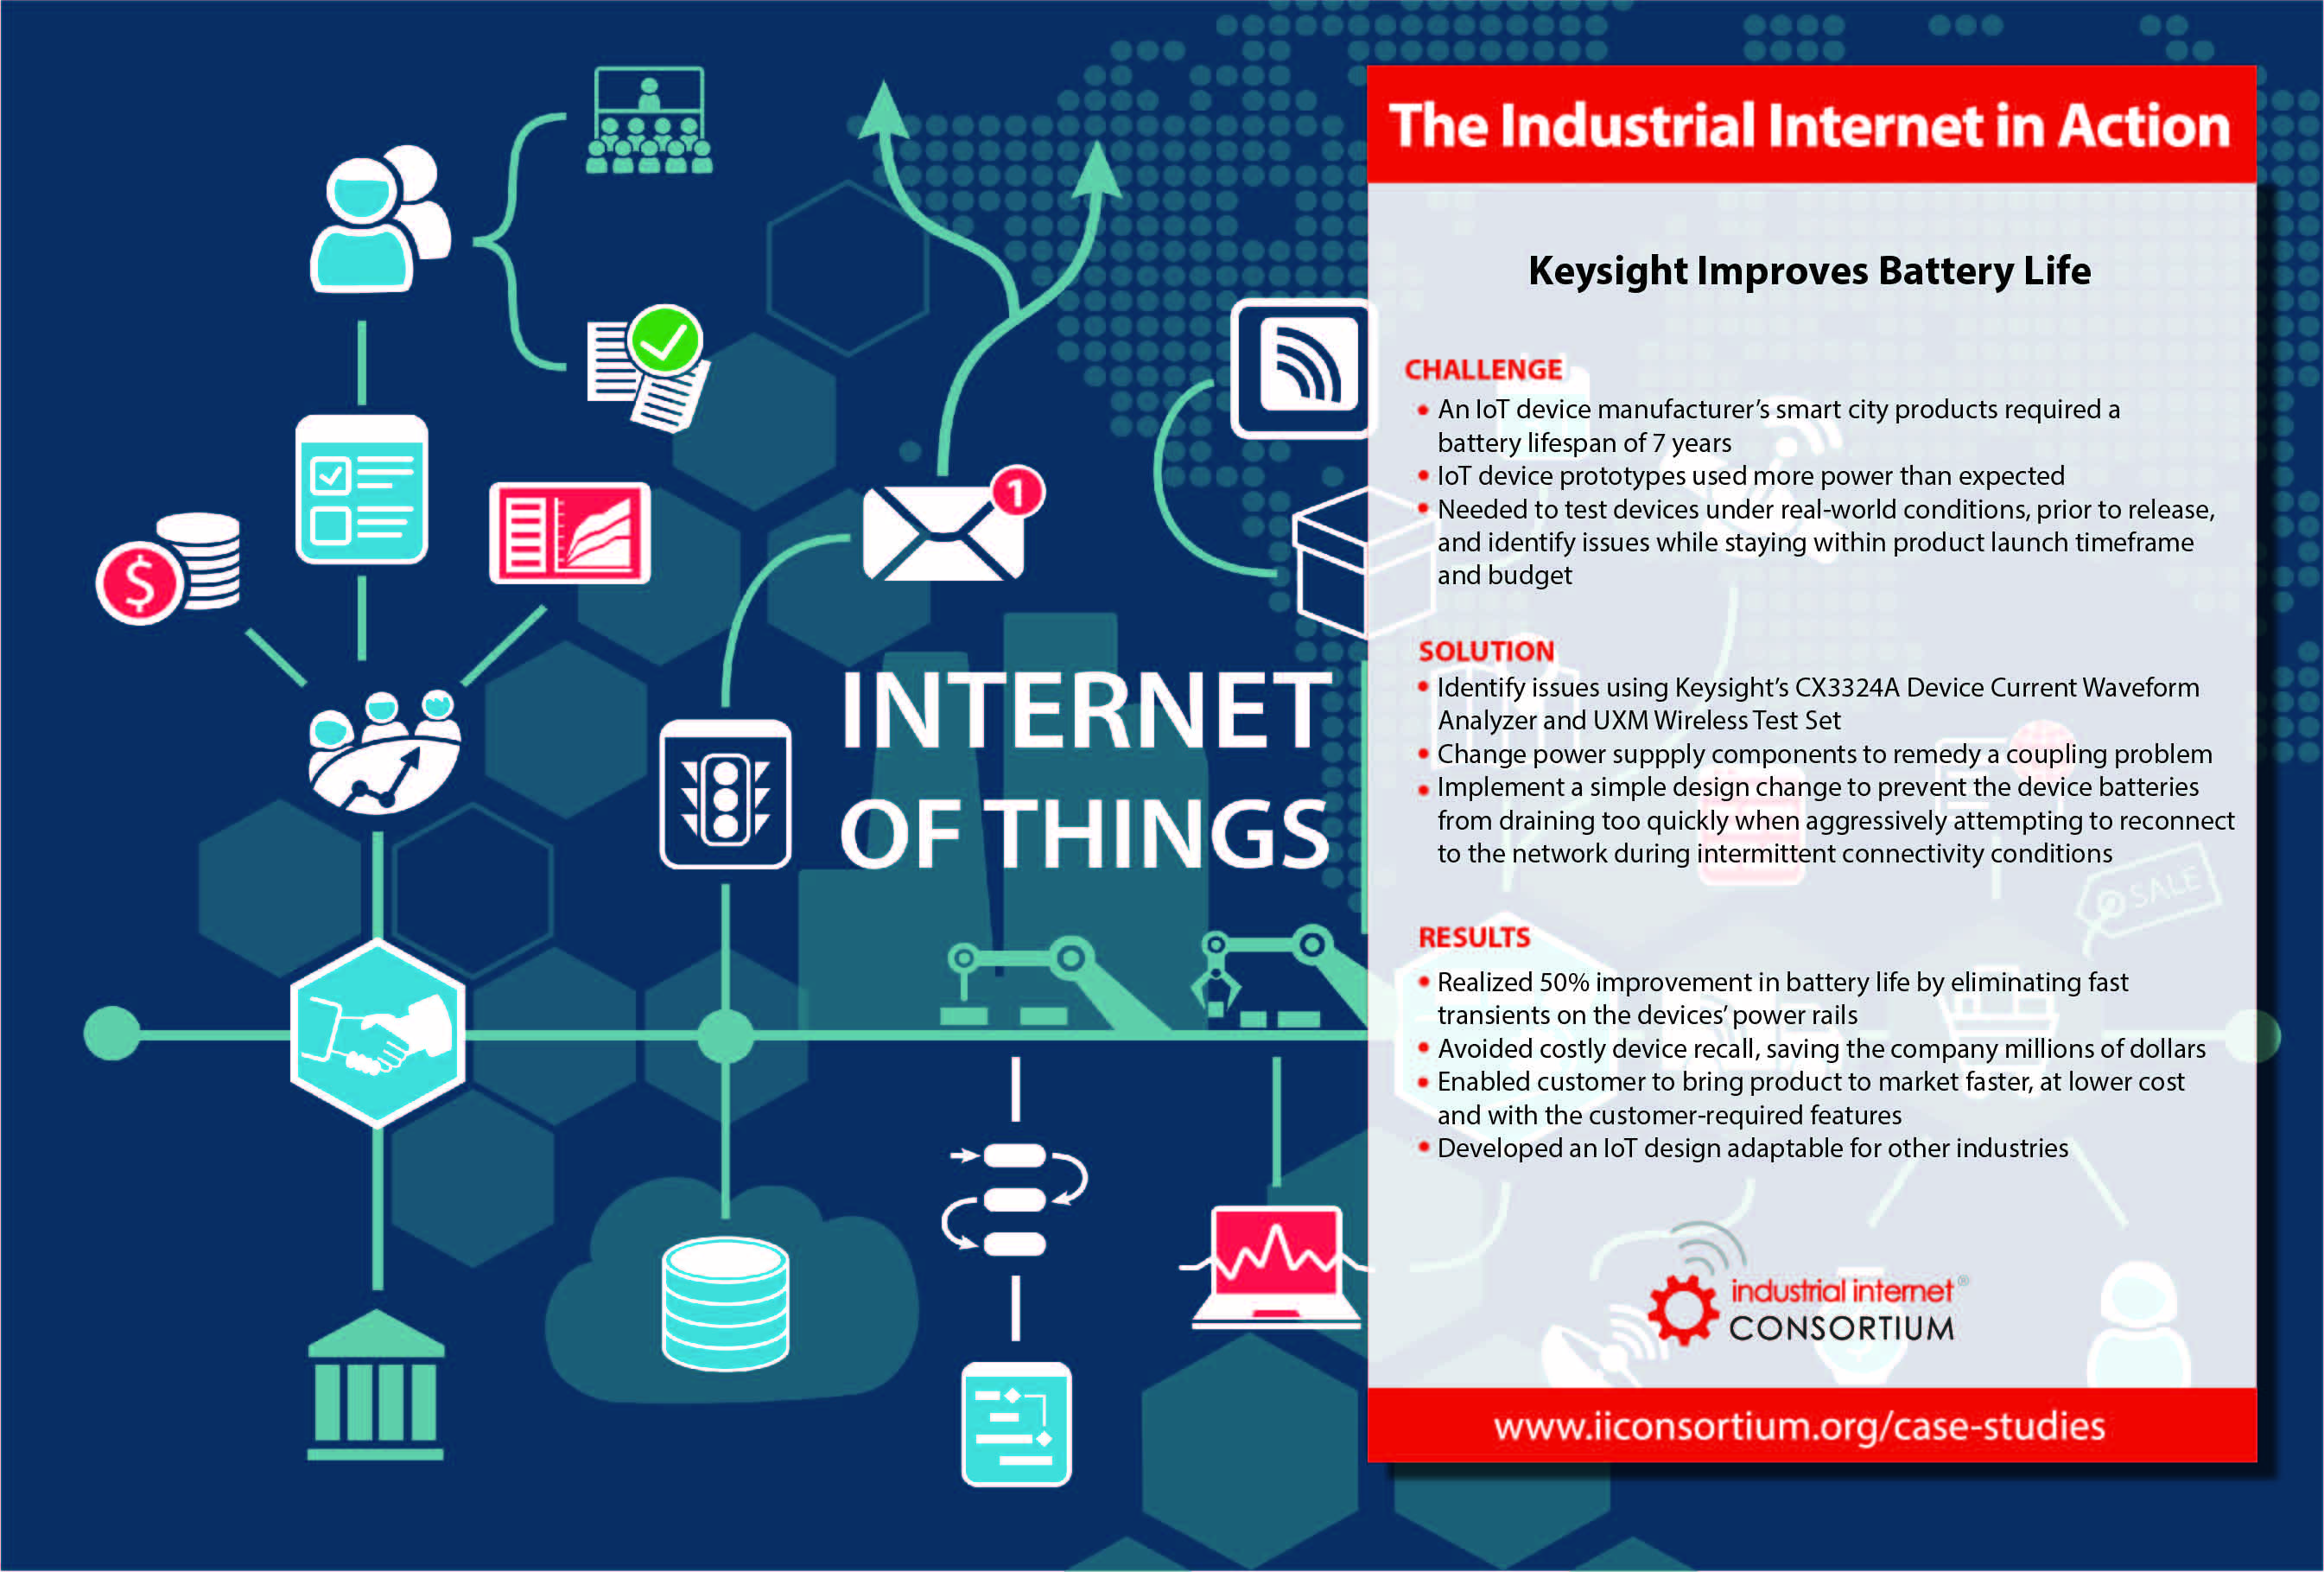 Internet solution. Cases of Industrial Internet of things. Industrial Internet программа США. Active Internet solutions.